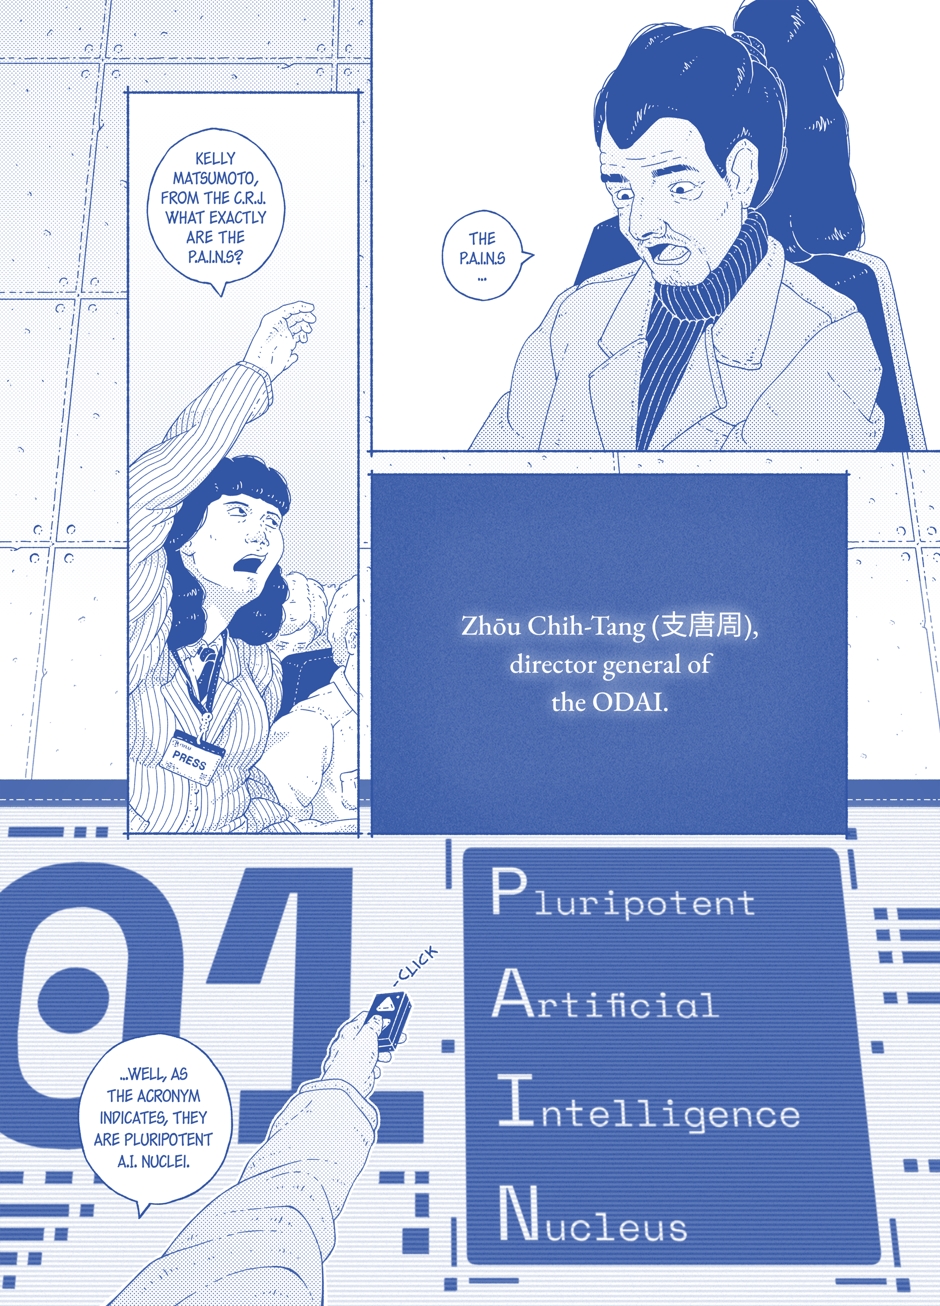 Comic page, done in blue ink. It shows a journalist asking a scientist, named Zhōu Chih-Tang, what the acronym PAIN means. He answers showing a diagram in a screen, which explains that it means pluripotent artificial intelligence nucleus.